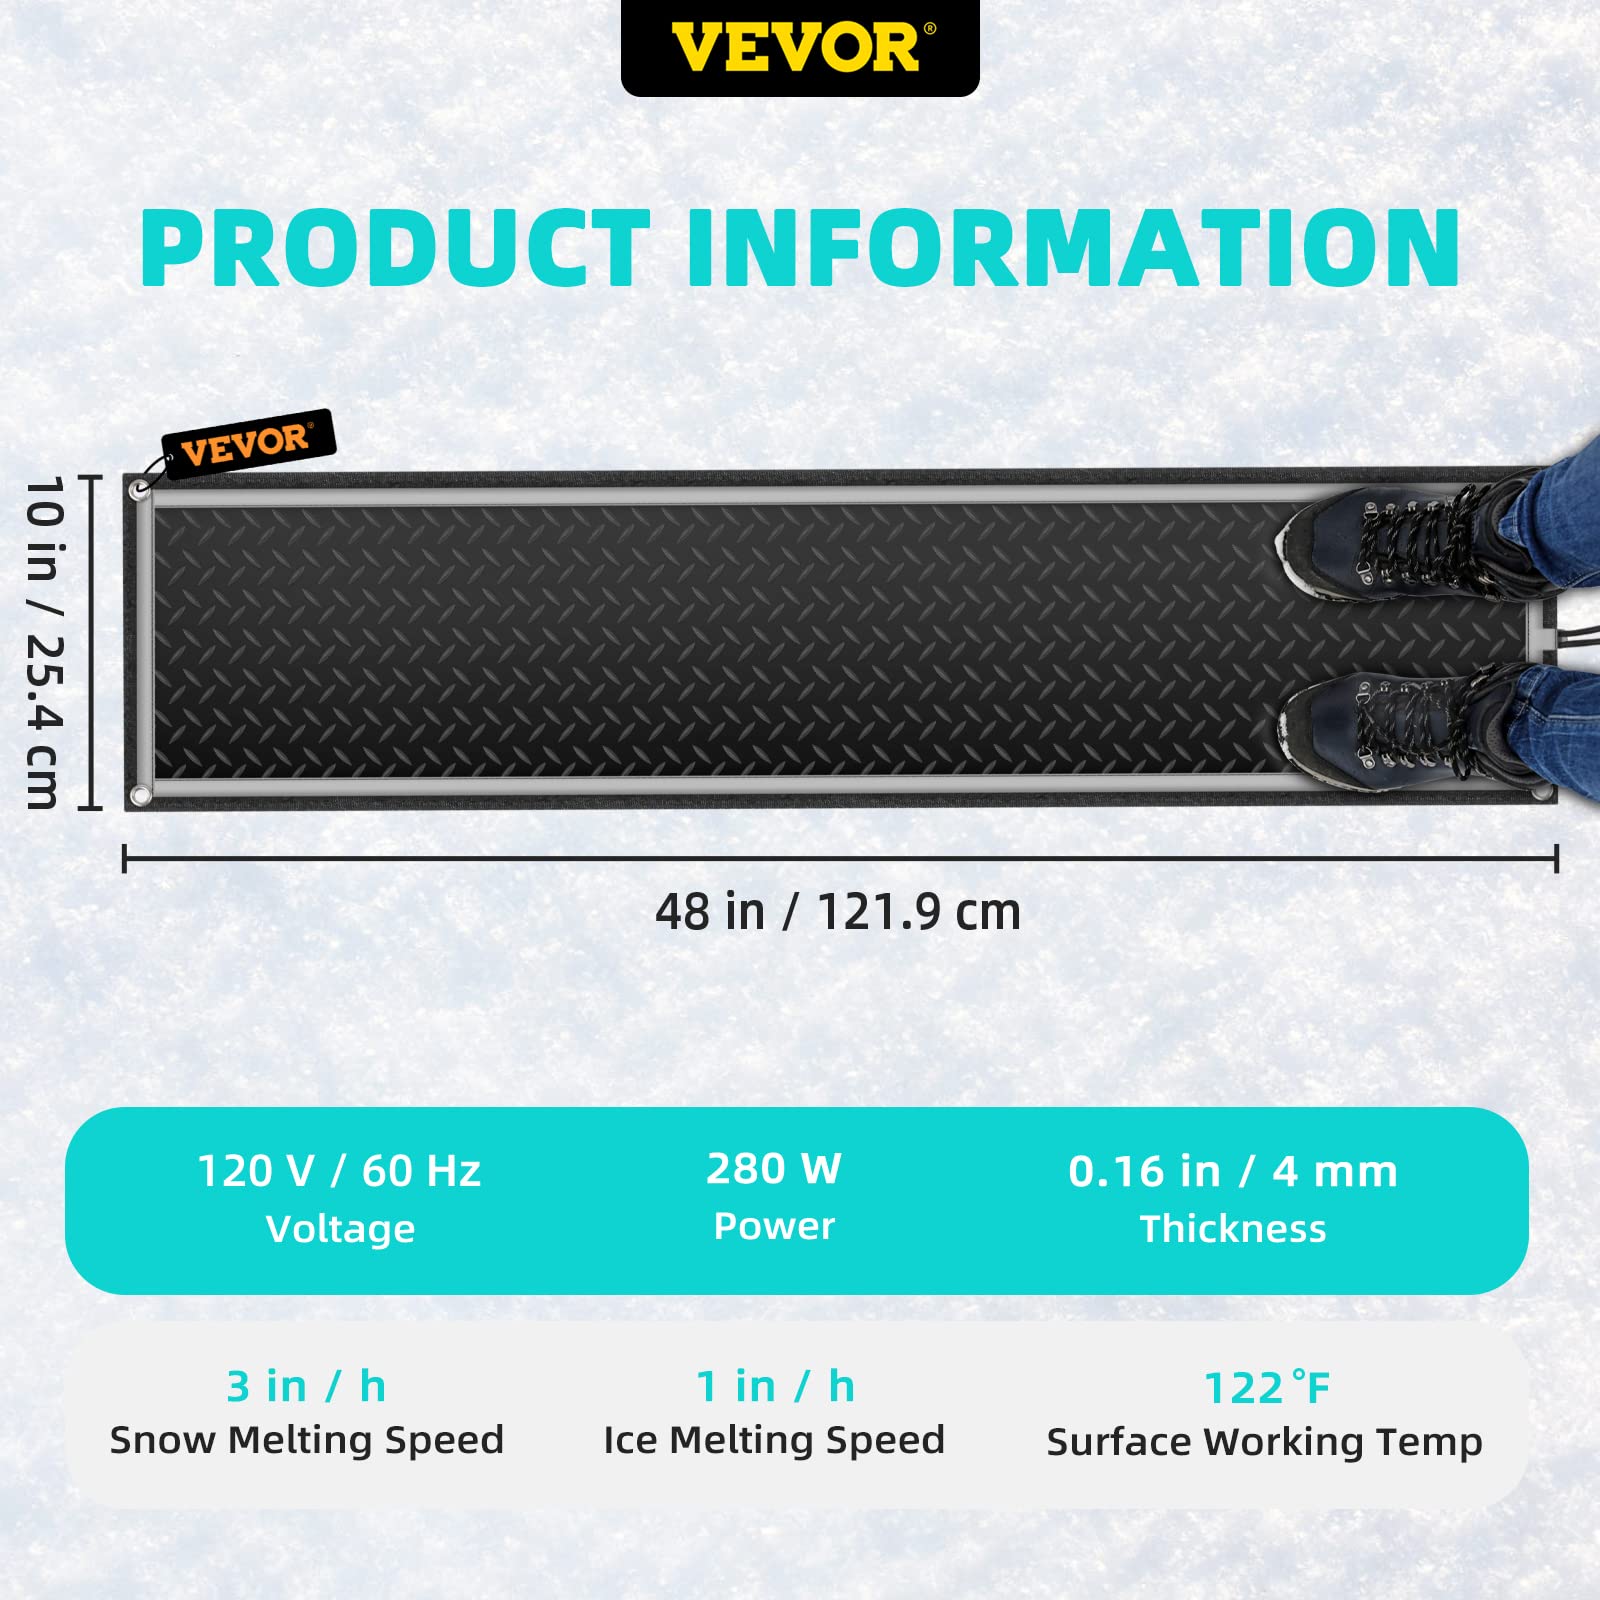 VEVOR Snow Melting Mat, 10 x 48 inch, 3 in/h Speed, Heated Outdoor Doormat for Winter Stairs, No-Slip Rubber with Plug, Power Cord, Outlet Timer, Reflective Strip, Velcro, Ground Stake, 10” x 48"